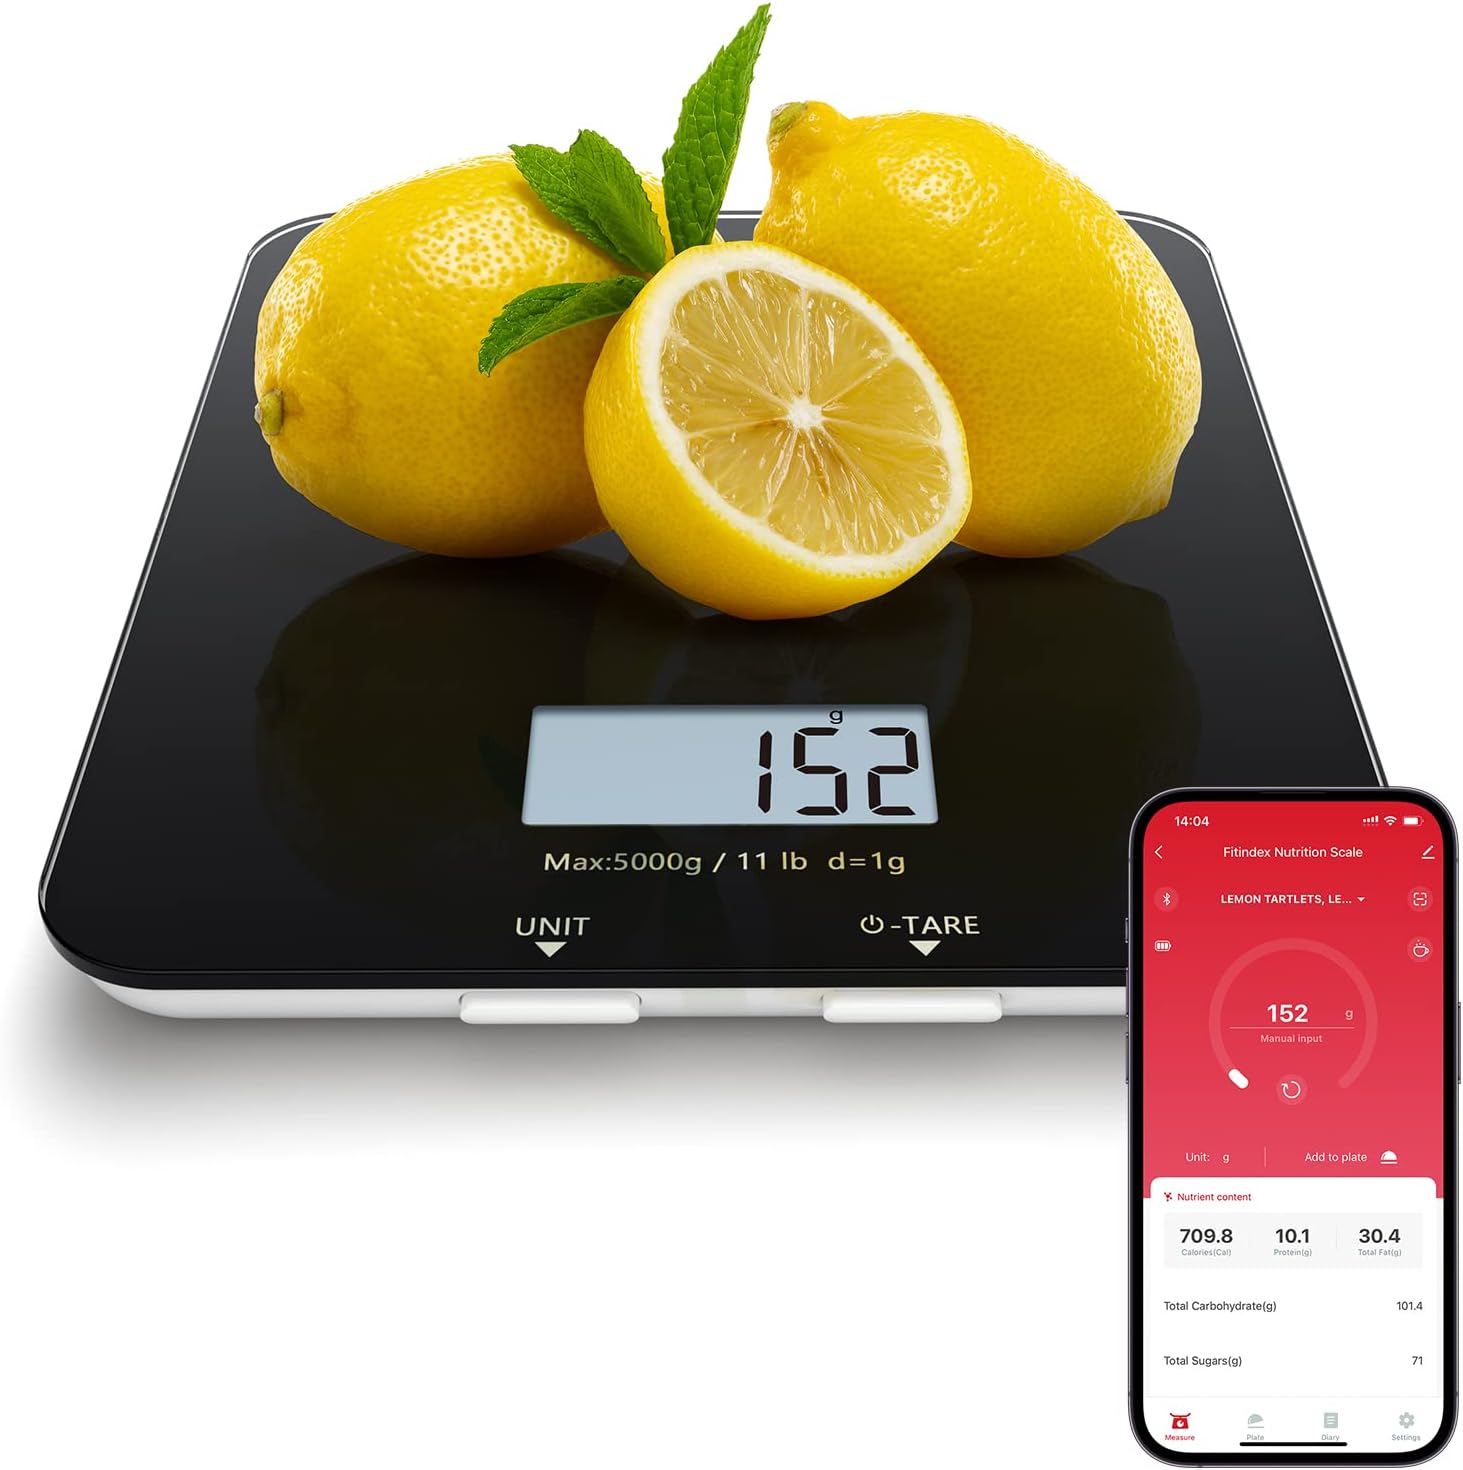 FITINDEX Smart Nutrition Scale User Manual